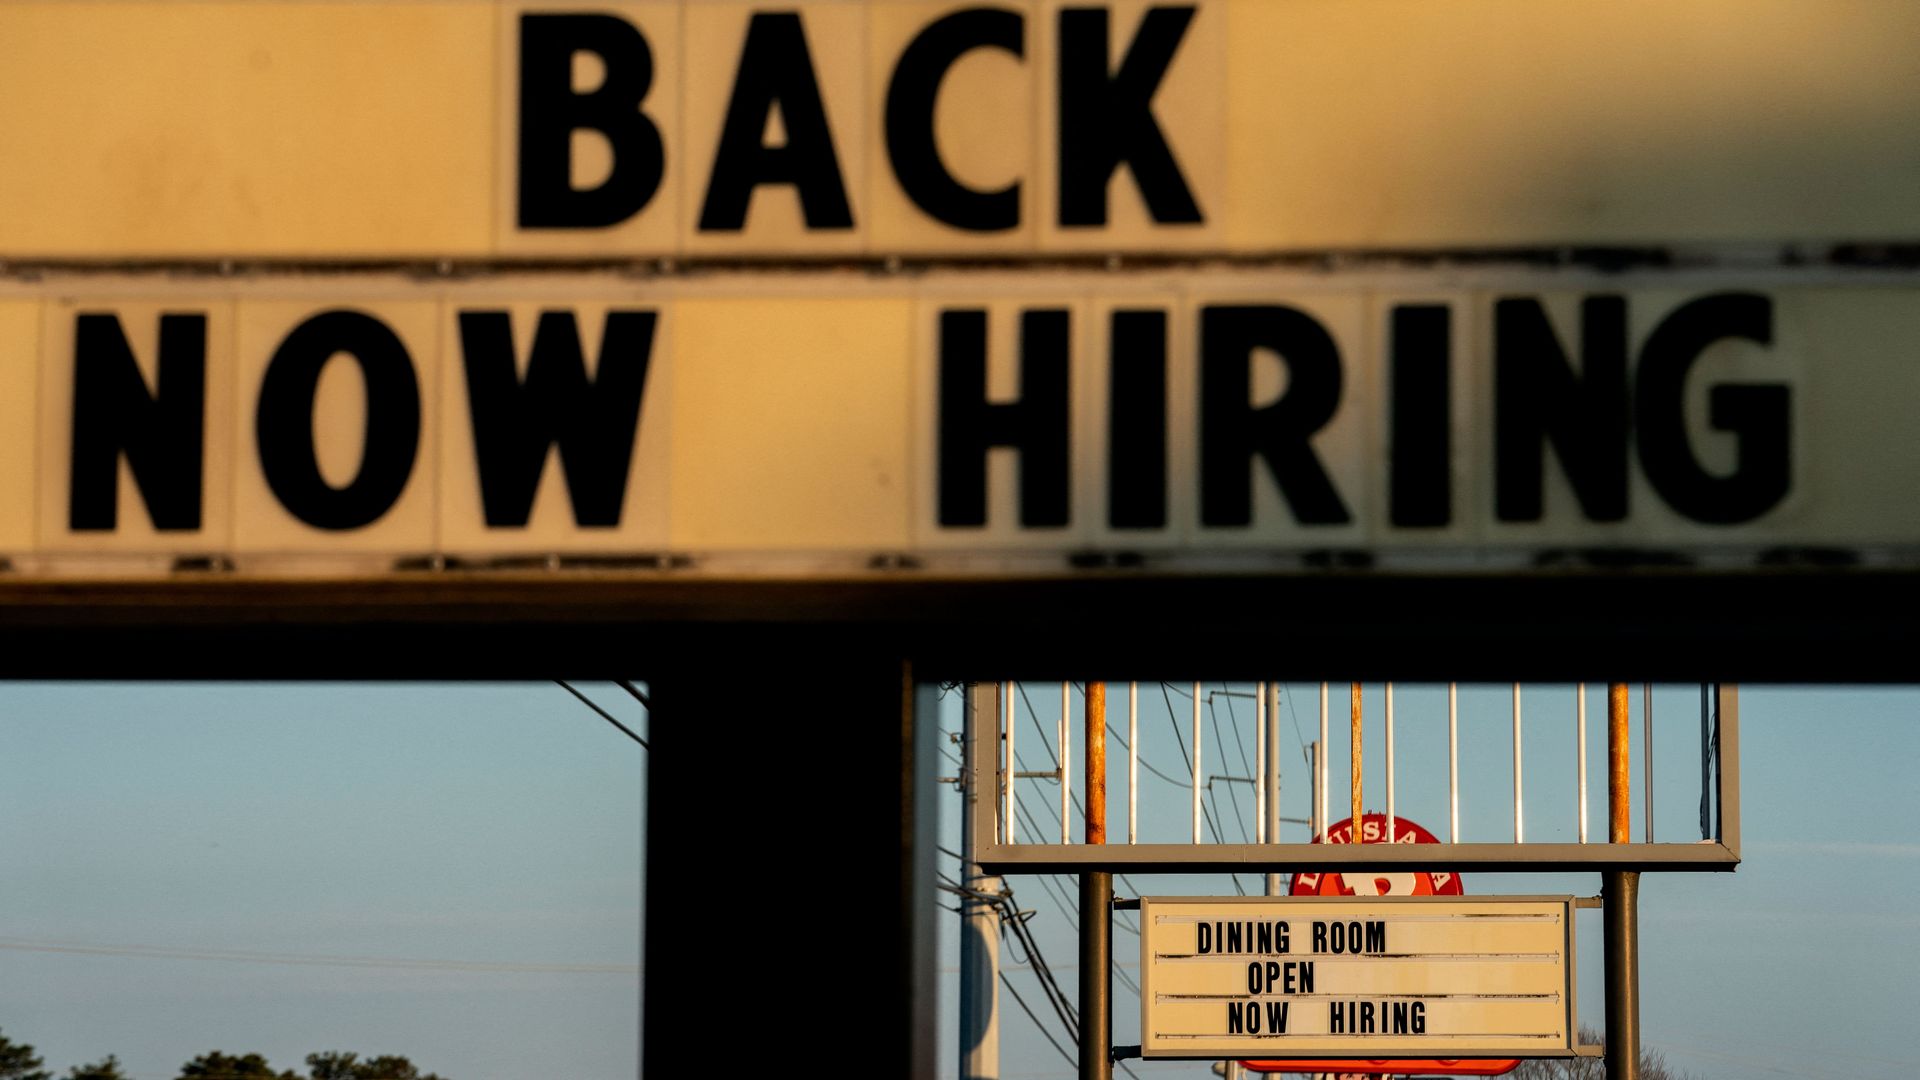 Now Hiring signs are displayed in front of restaurants in Rehoboth Beach, Delaware, on March 19, 2022.